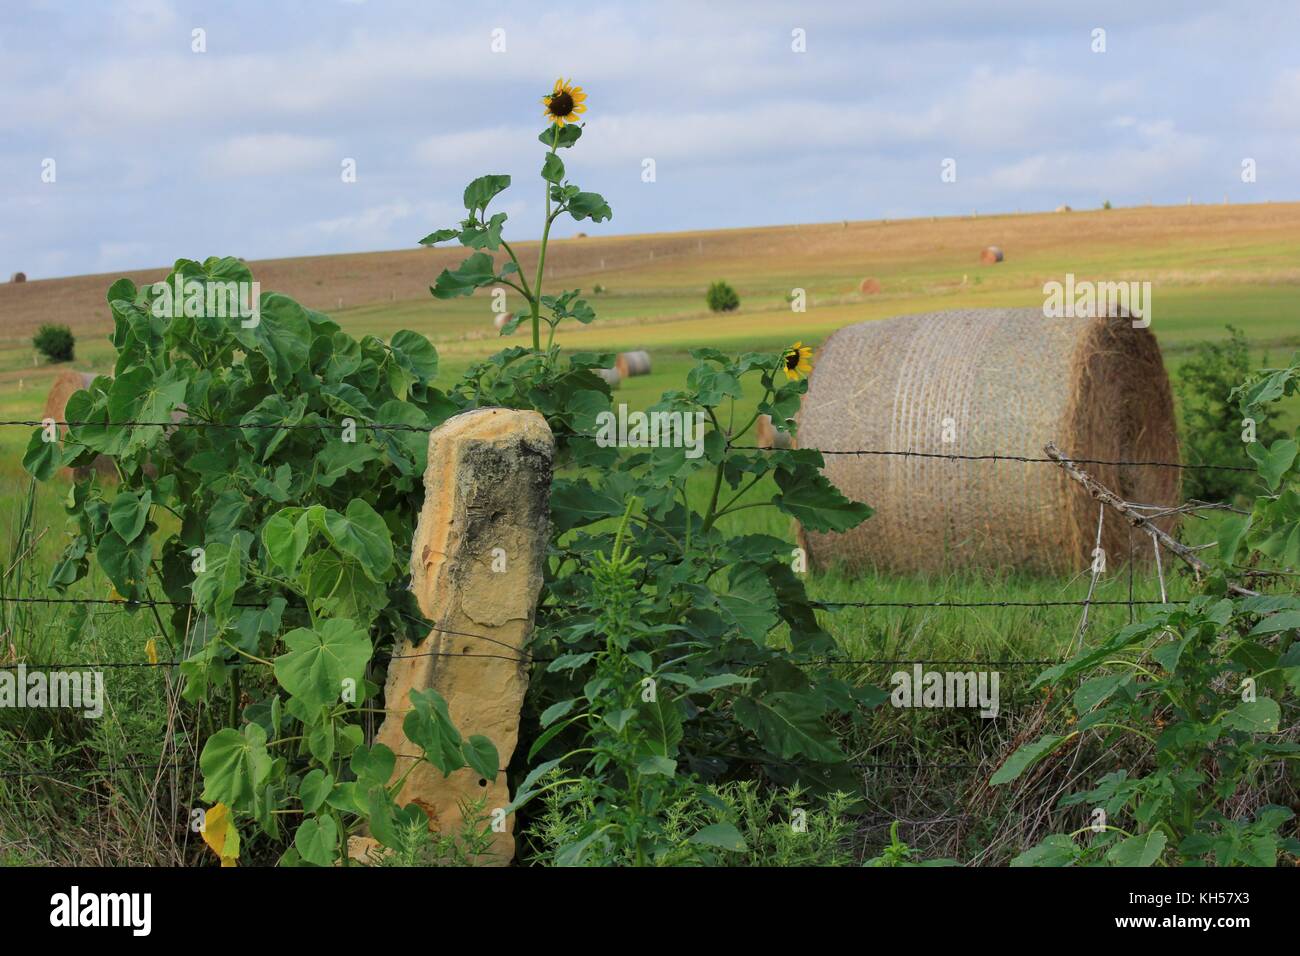 Kansas Limestone Fence with Sunflowers, Hay Bales and a Pasture. Stock Photo